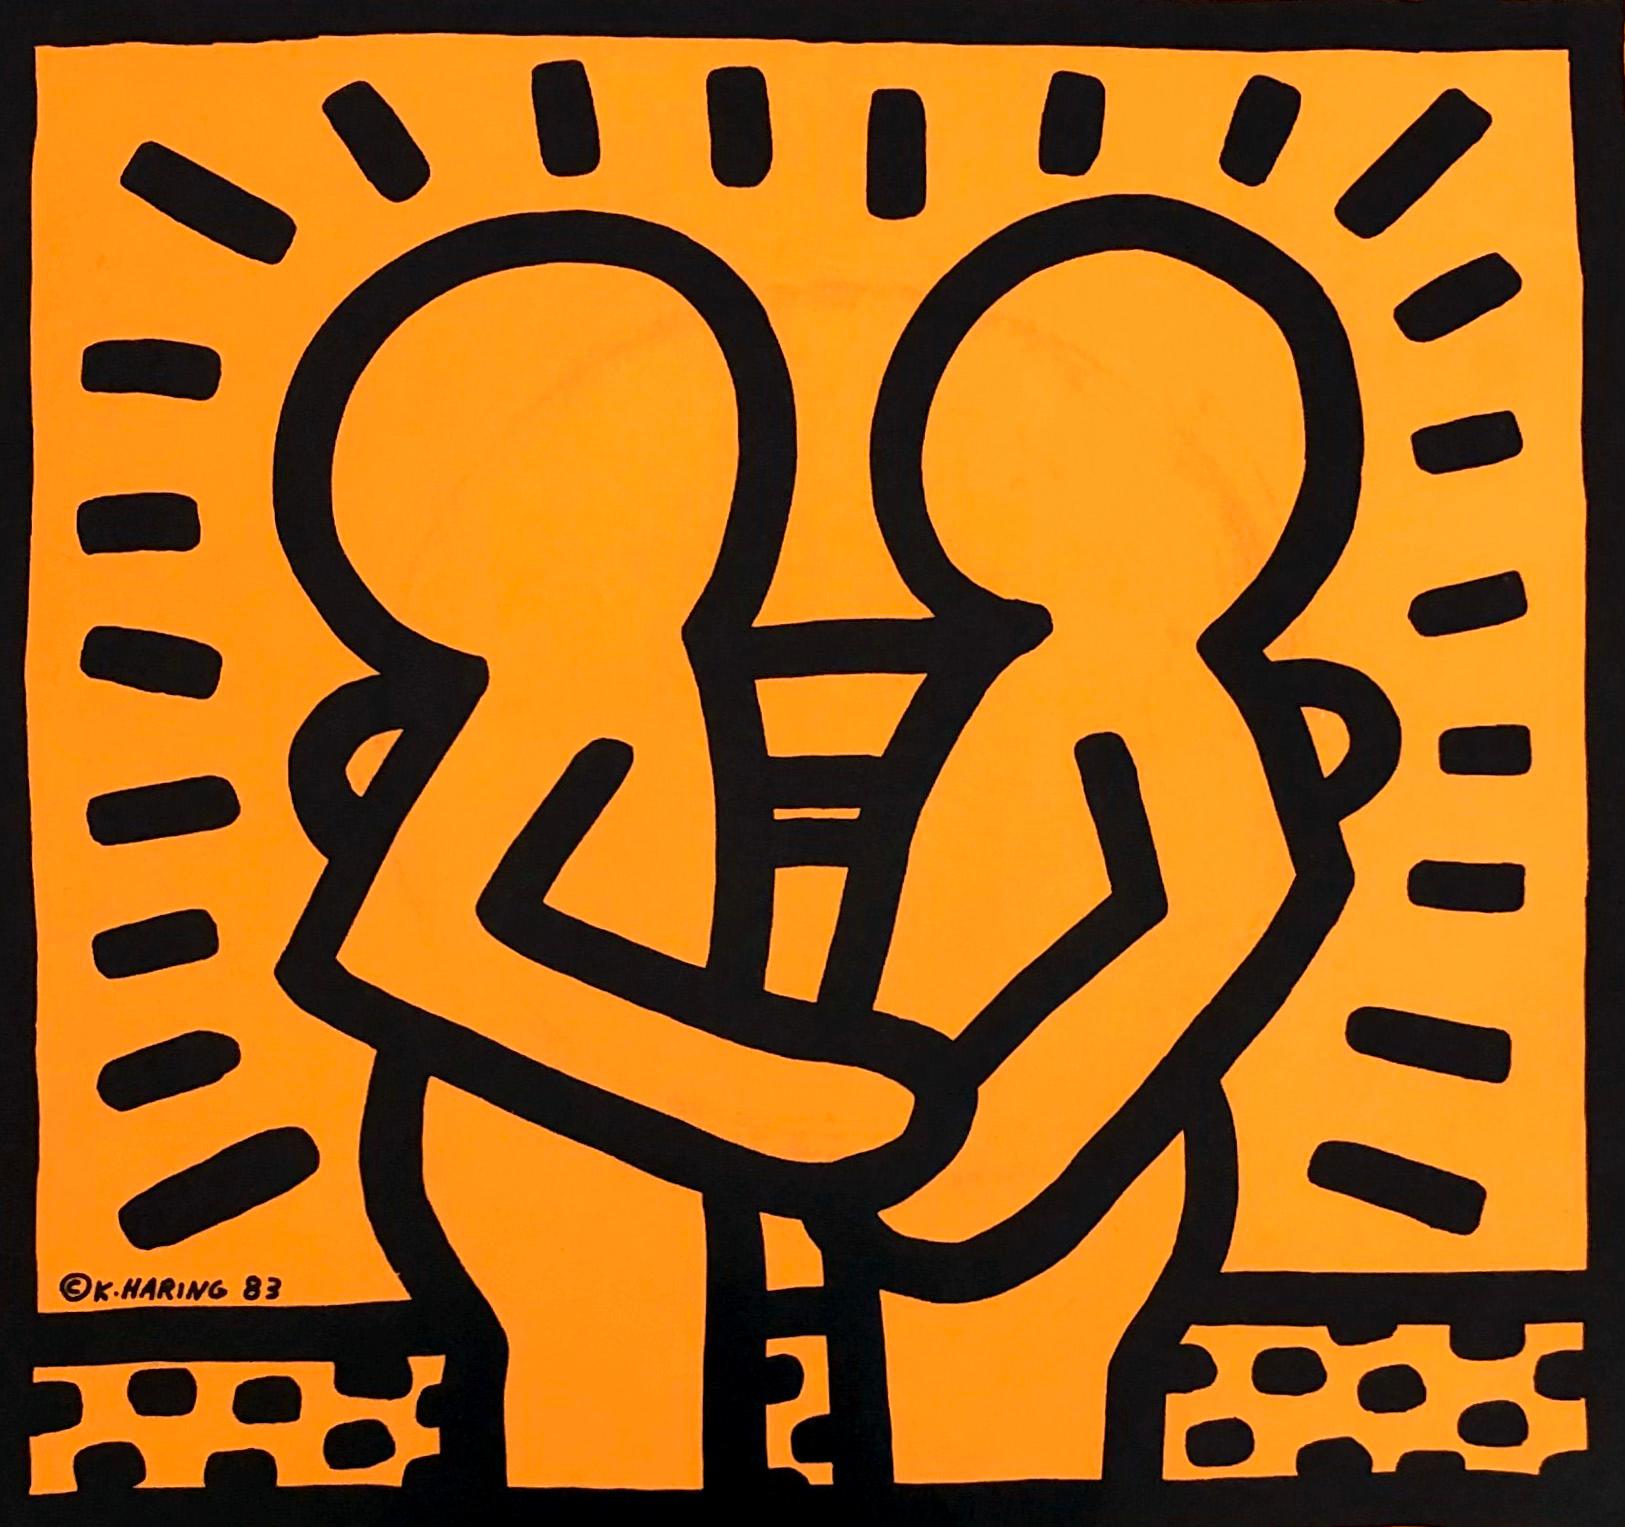 David BOWIE "Without You" A Rare Highly Sought After Vinyl Art Cover featuring Original Artwork by Keith Haring

Year: 1983

Medium: Off-Set Lithograph

Dimensions: 7 x 7 inches

Cover: Minor shelf wear and fading to right upper edge; otherwise good